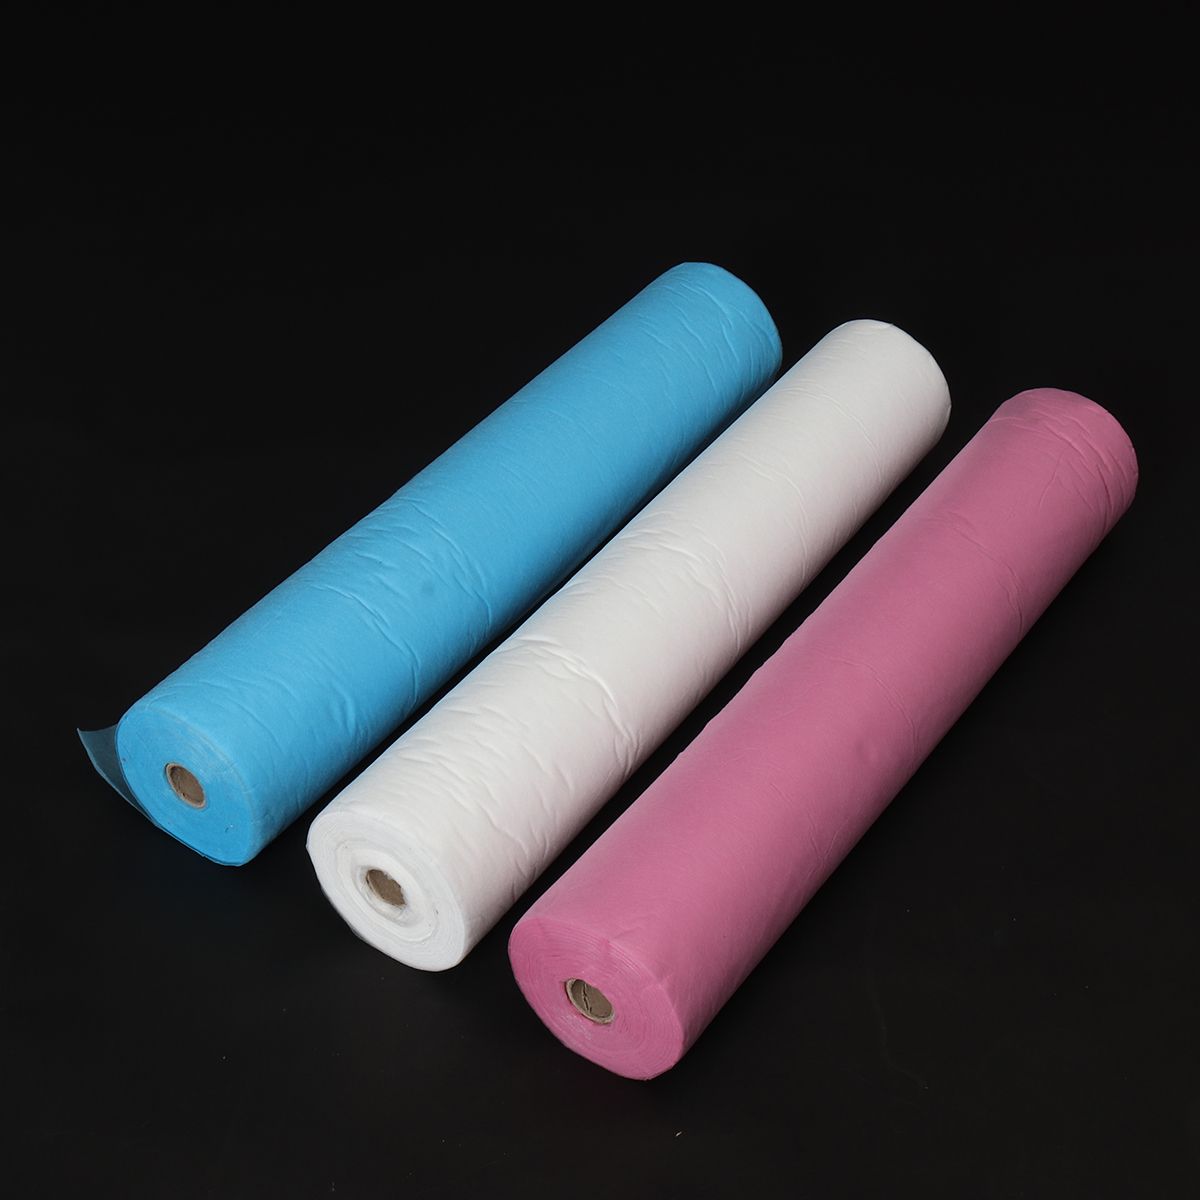 180x80cm-50PcsRoll-Disposable-Massage-Table-Bed-Cover-Sheet-Beauty-Waxing-1737148